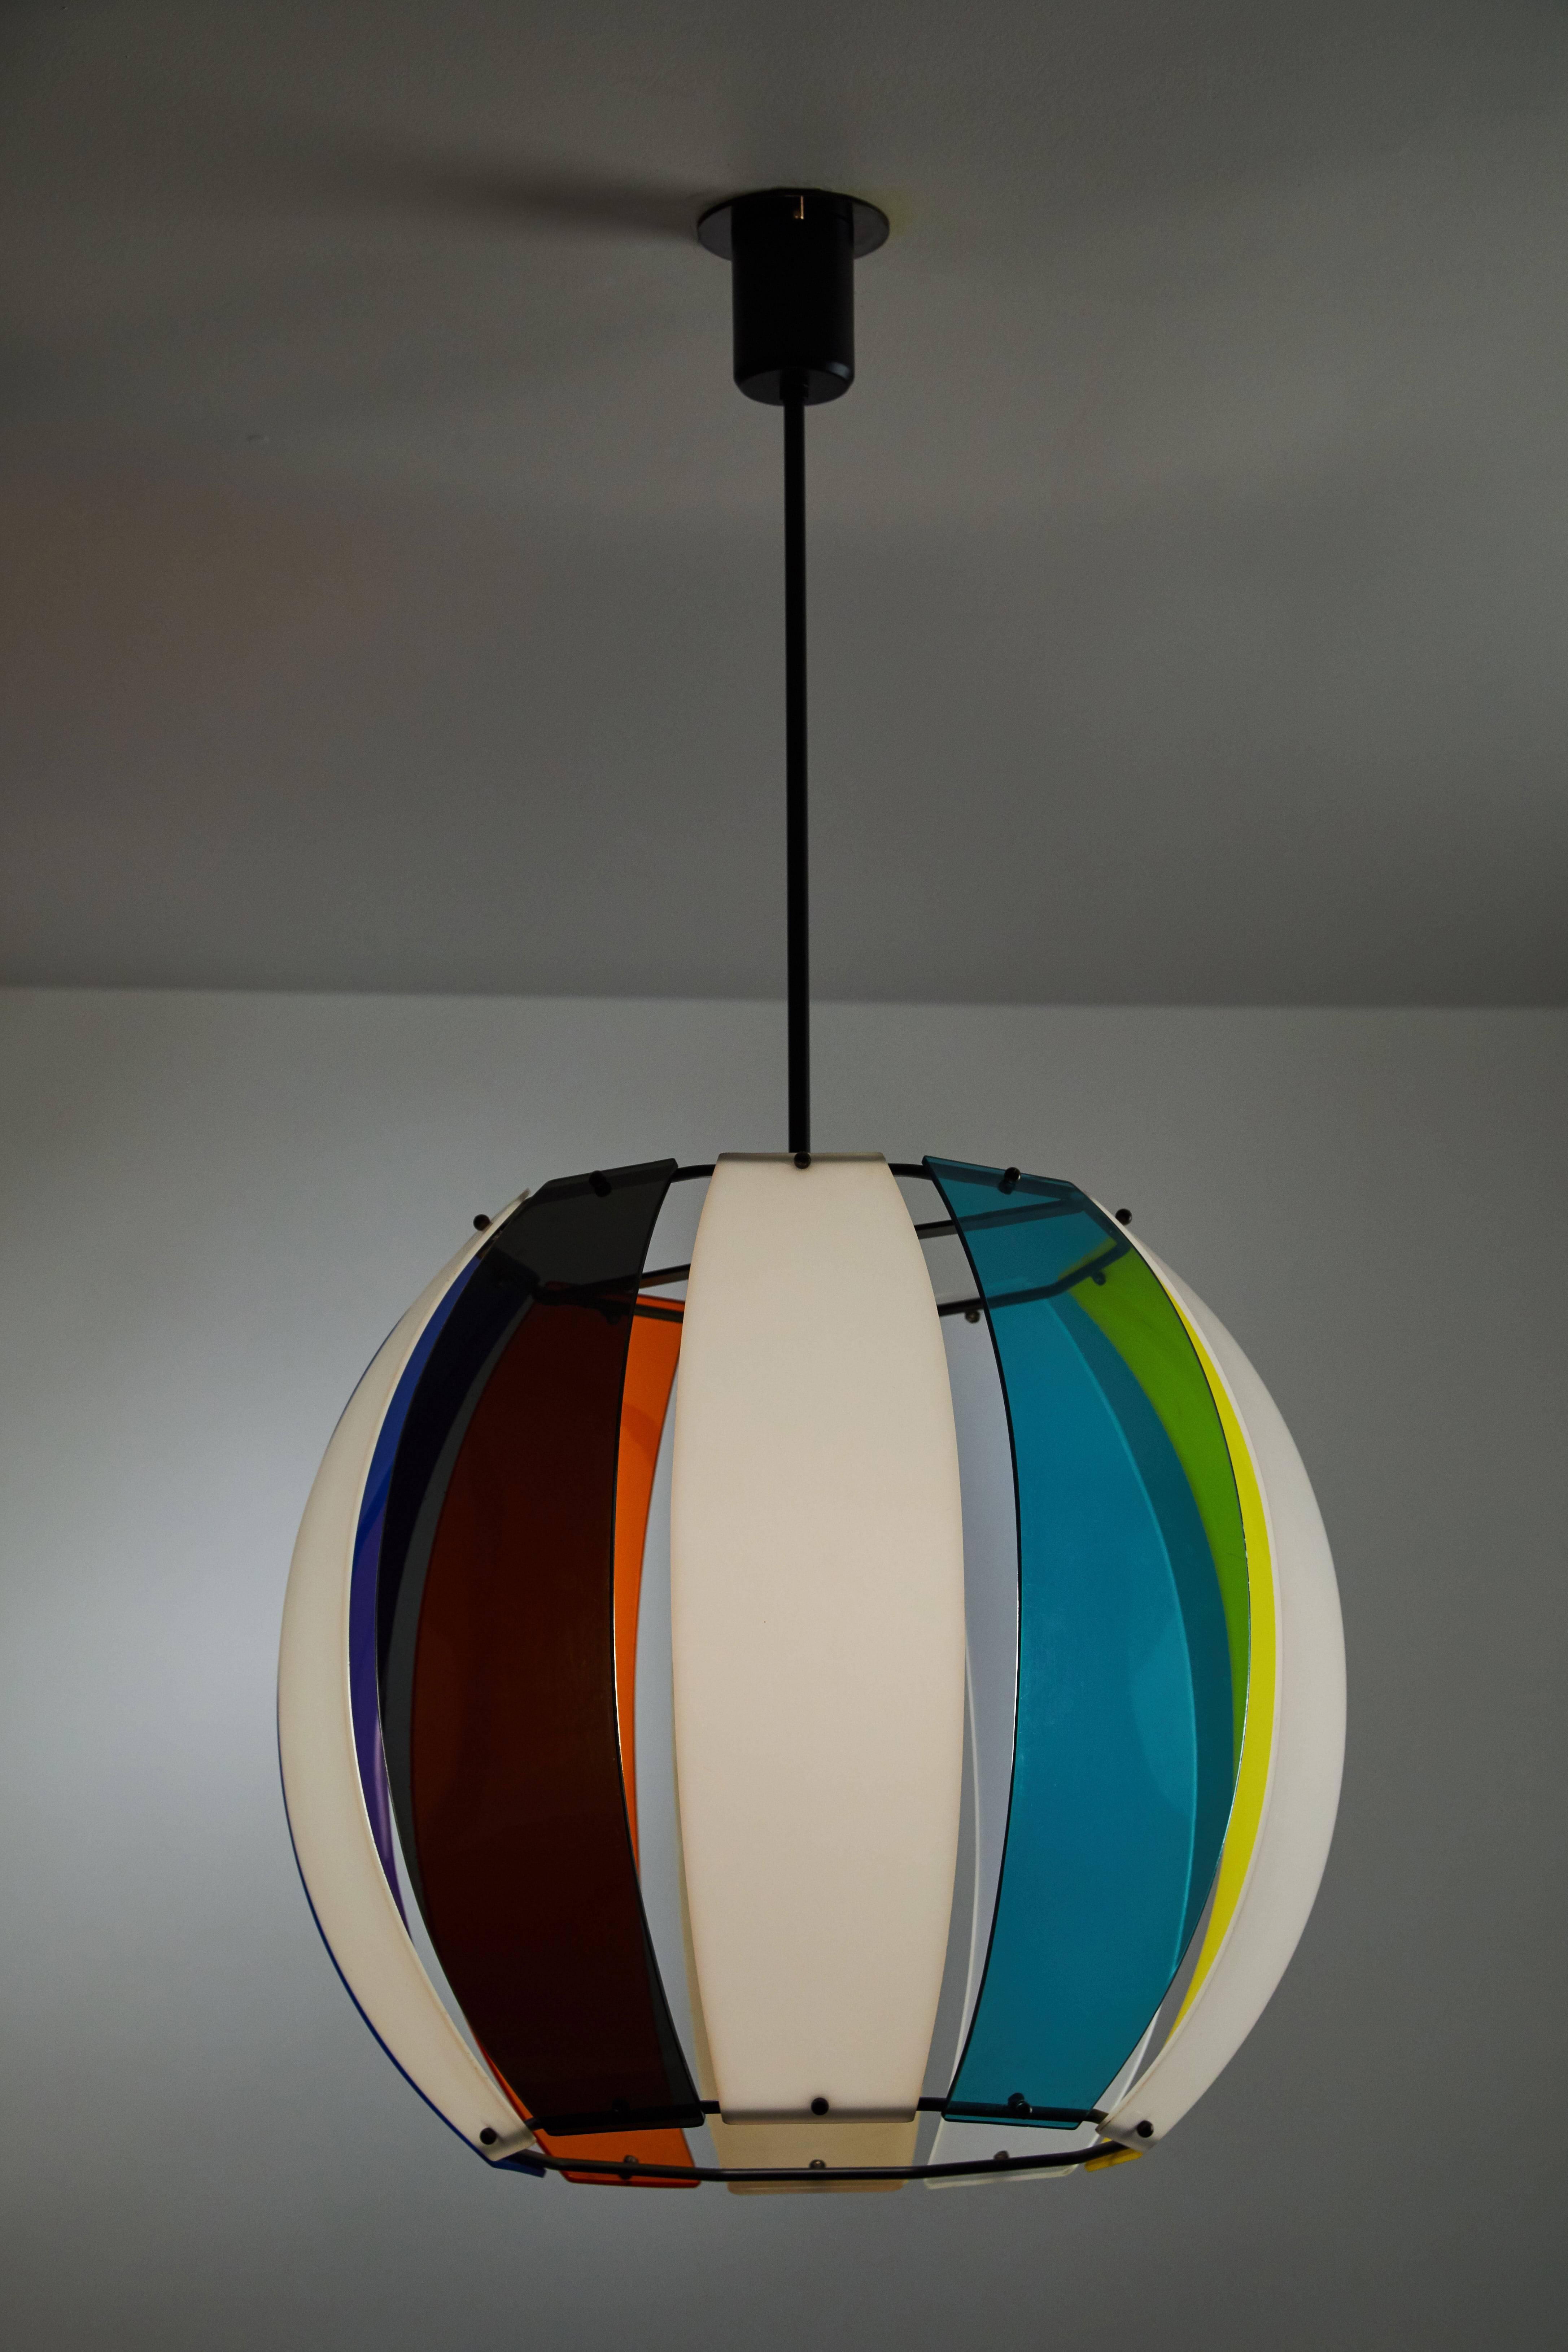 Pendant light by Casey Fantin designed in Italy, 1955. Perspex (acrylic) and painted metal. Wired for US junction boxes. Takes one E27 100w maximum bulb.